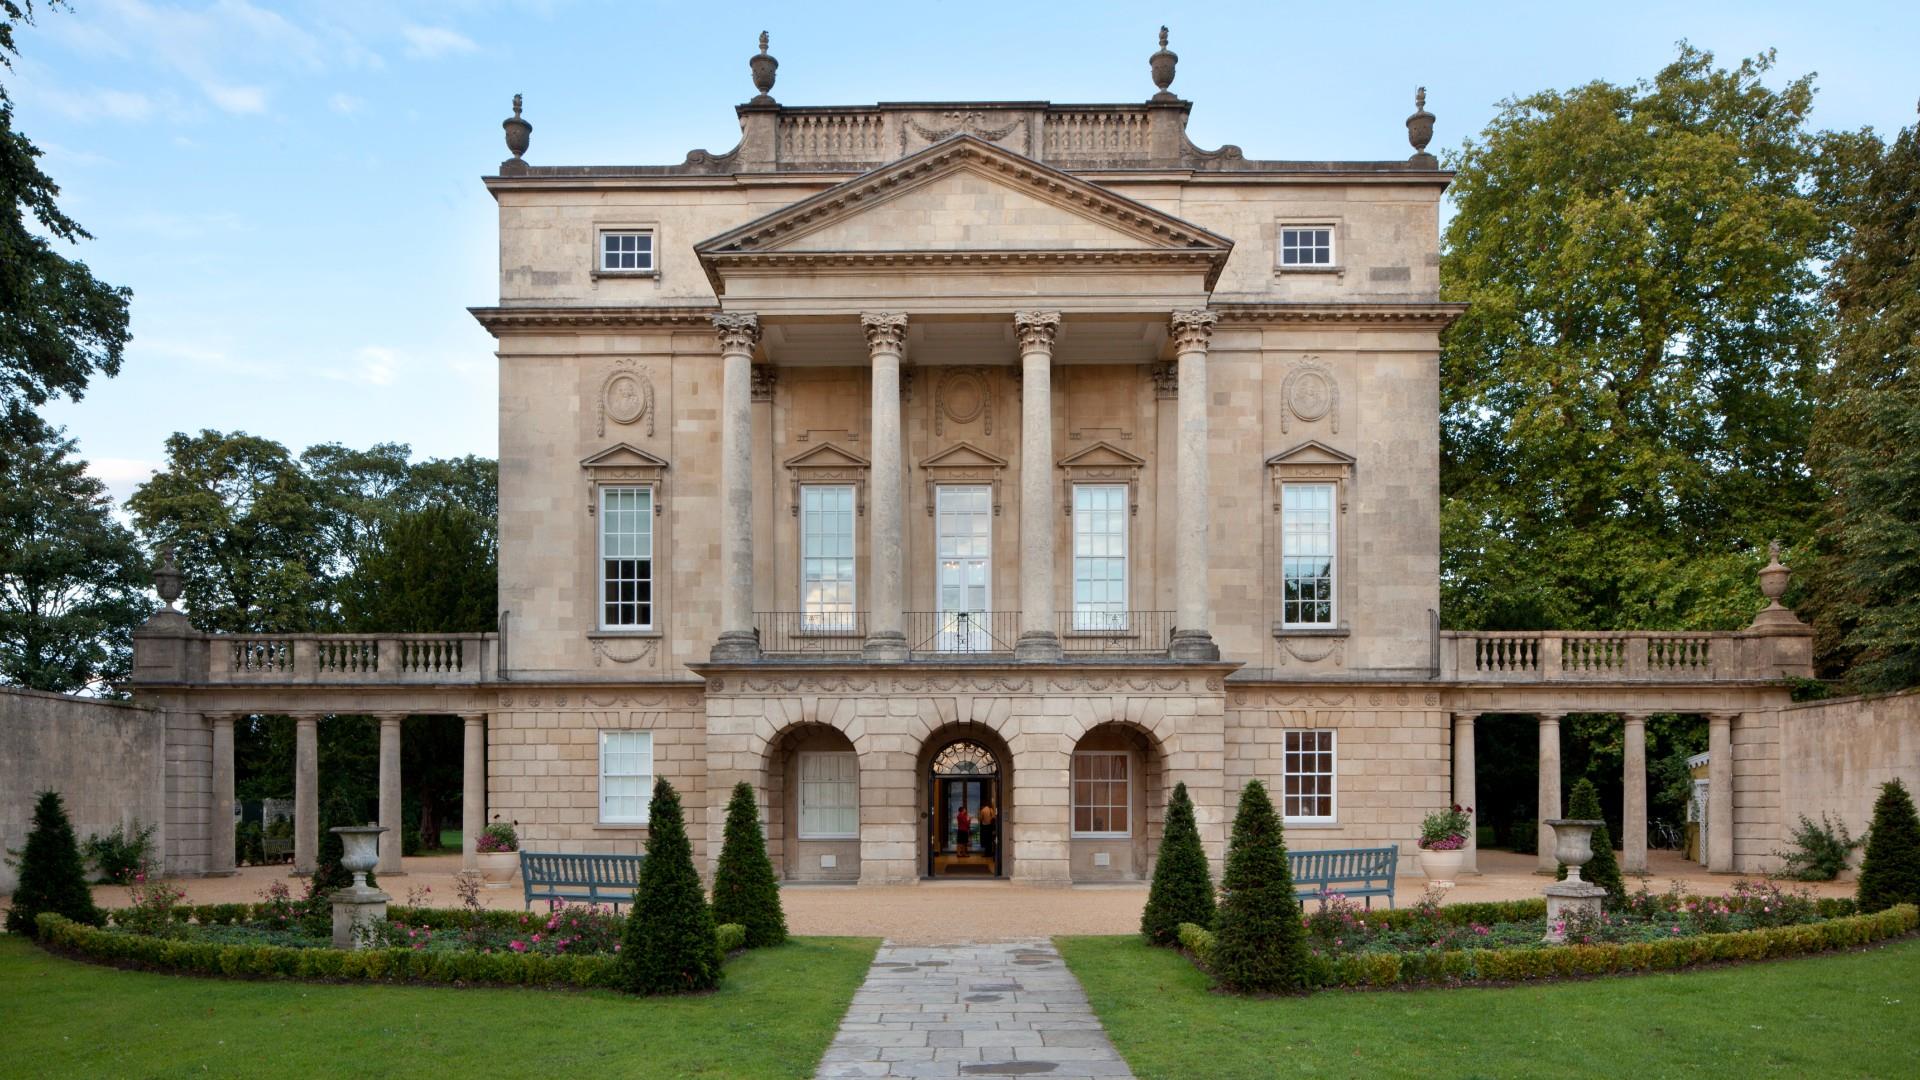 The front exterior of The Holburne Museum on a sunny day